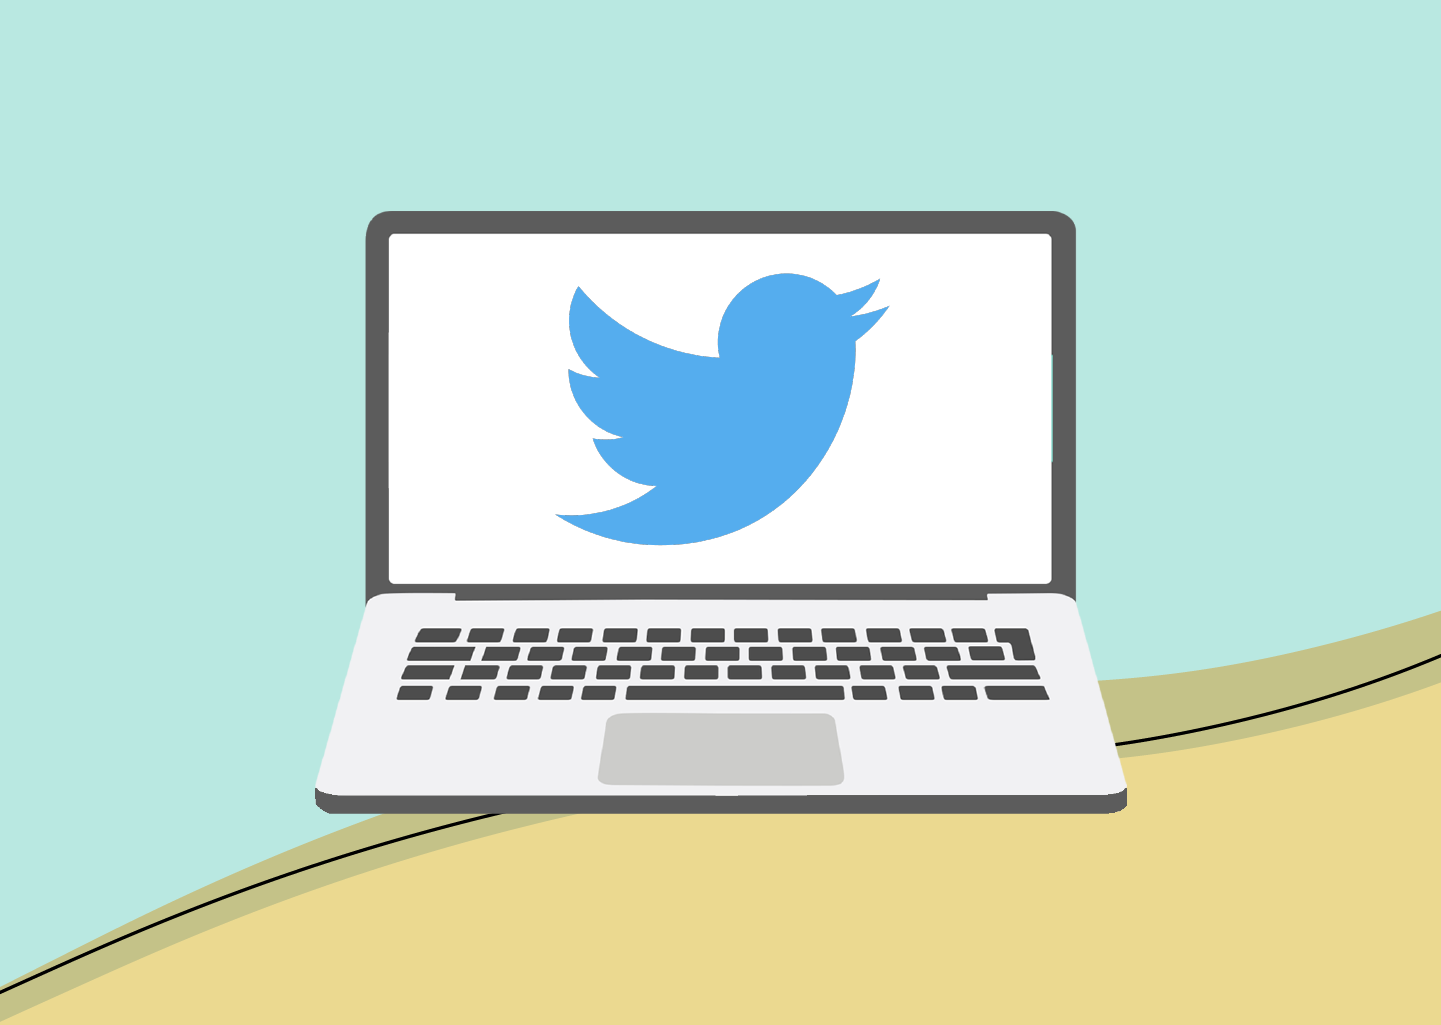 Twitter for Nonprofits: Does Your Organization Really Need to Tweet?